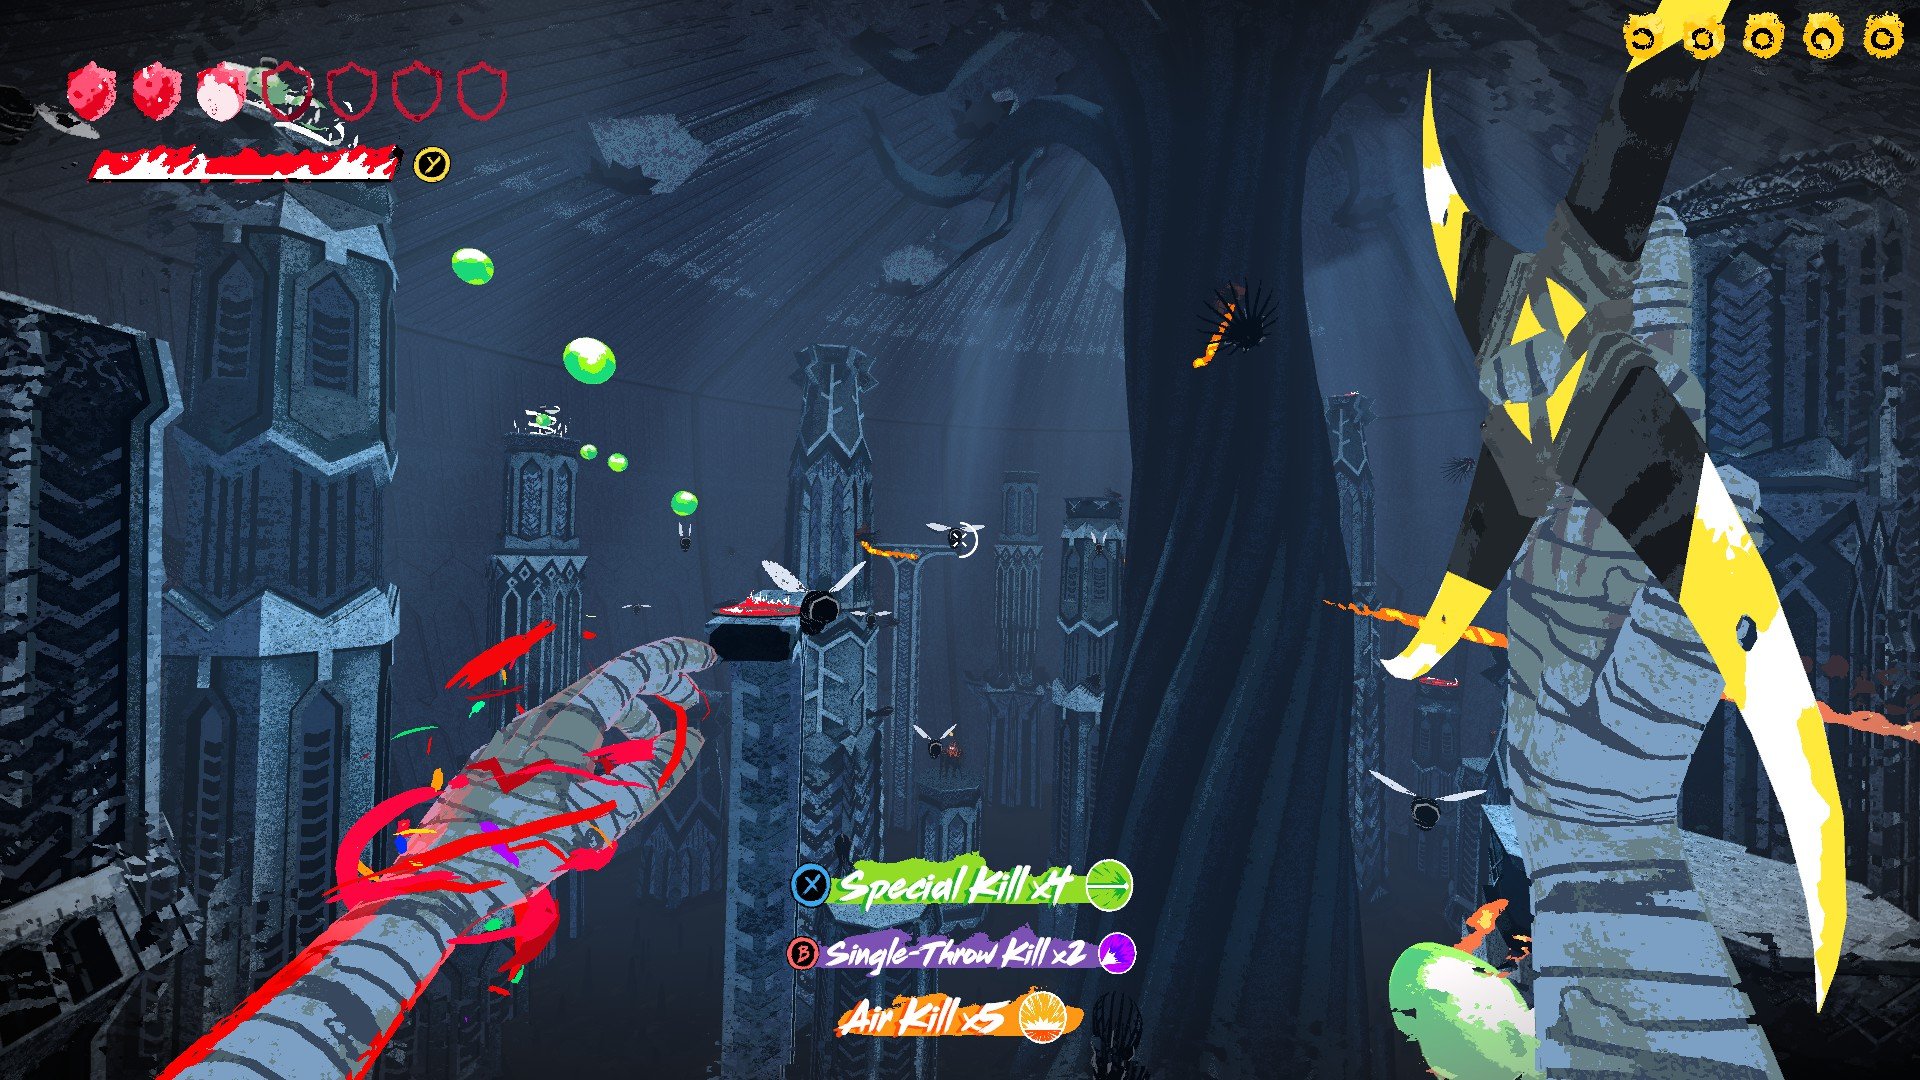 The player flying through a large engine surrounded by flying enemies